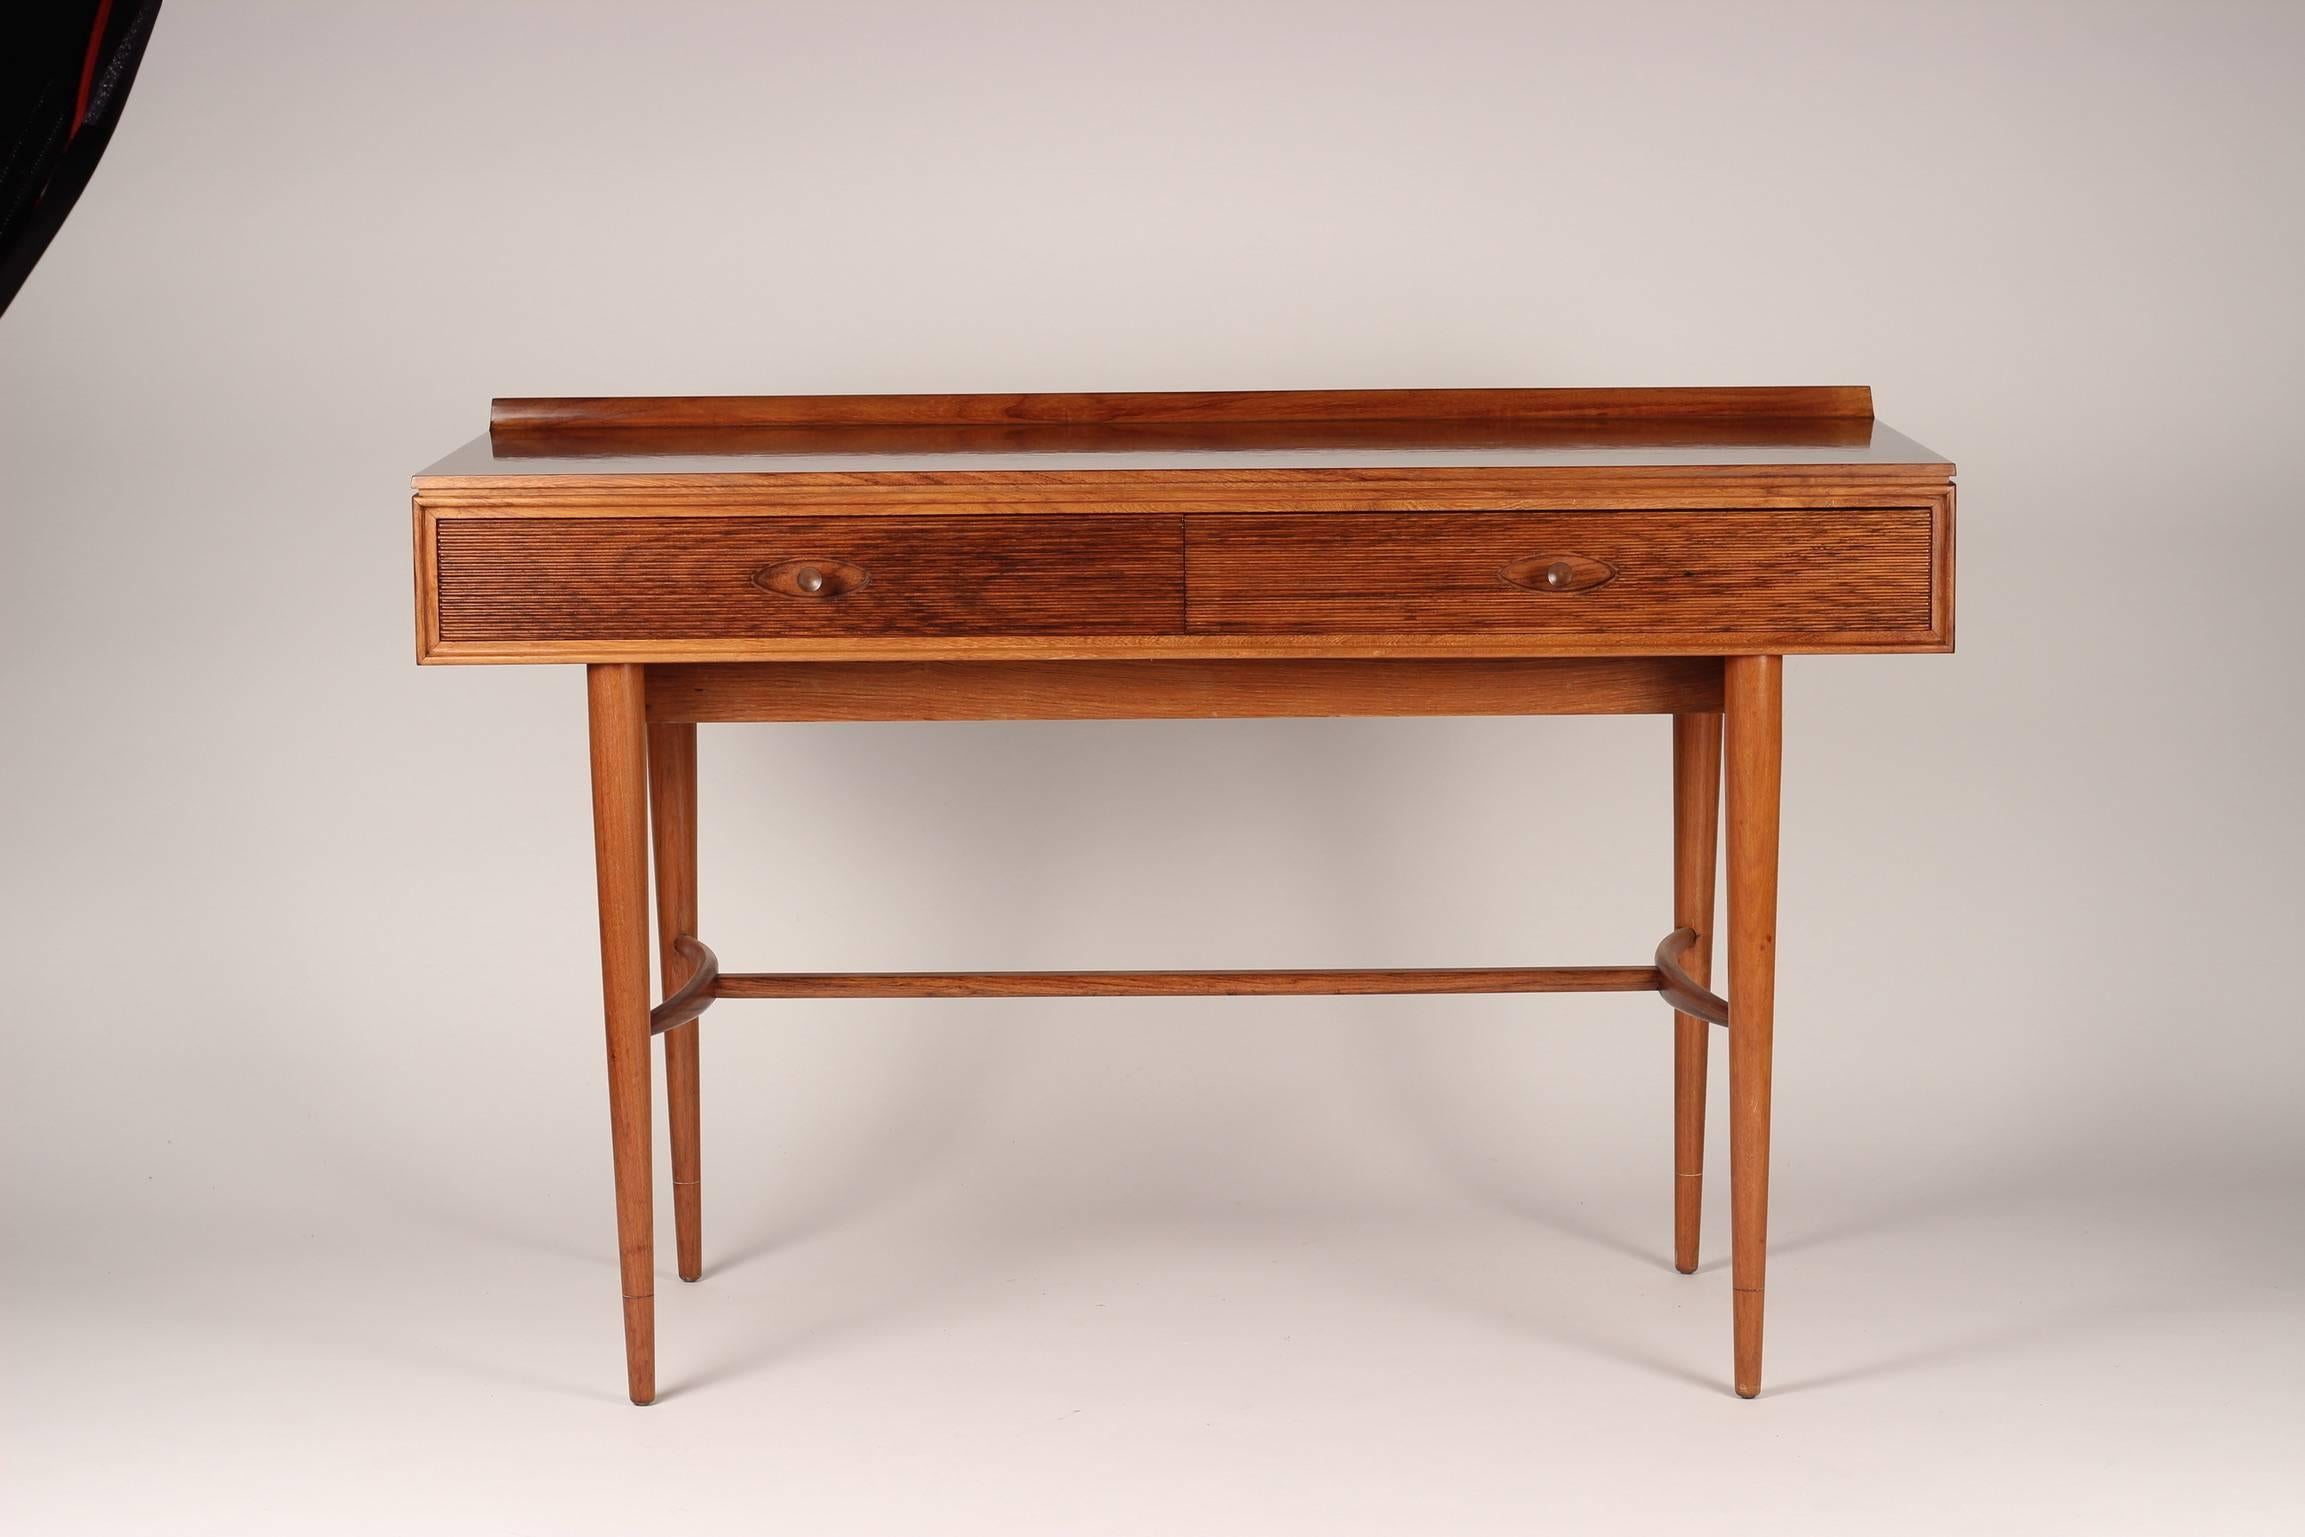 A versatile desk from the English maker and wonderfully sounding Archie Shine. Robert Heritage worked on a number of pieces including the Hamilton range which included sideboards and tables. This desk functions equally well as a writing table or